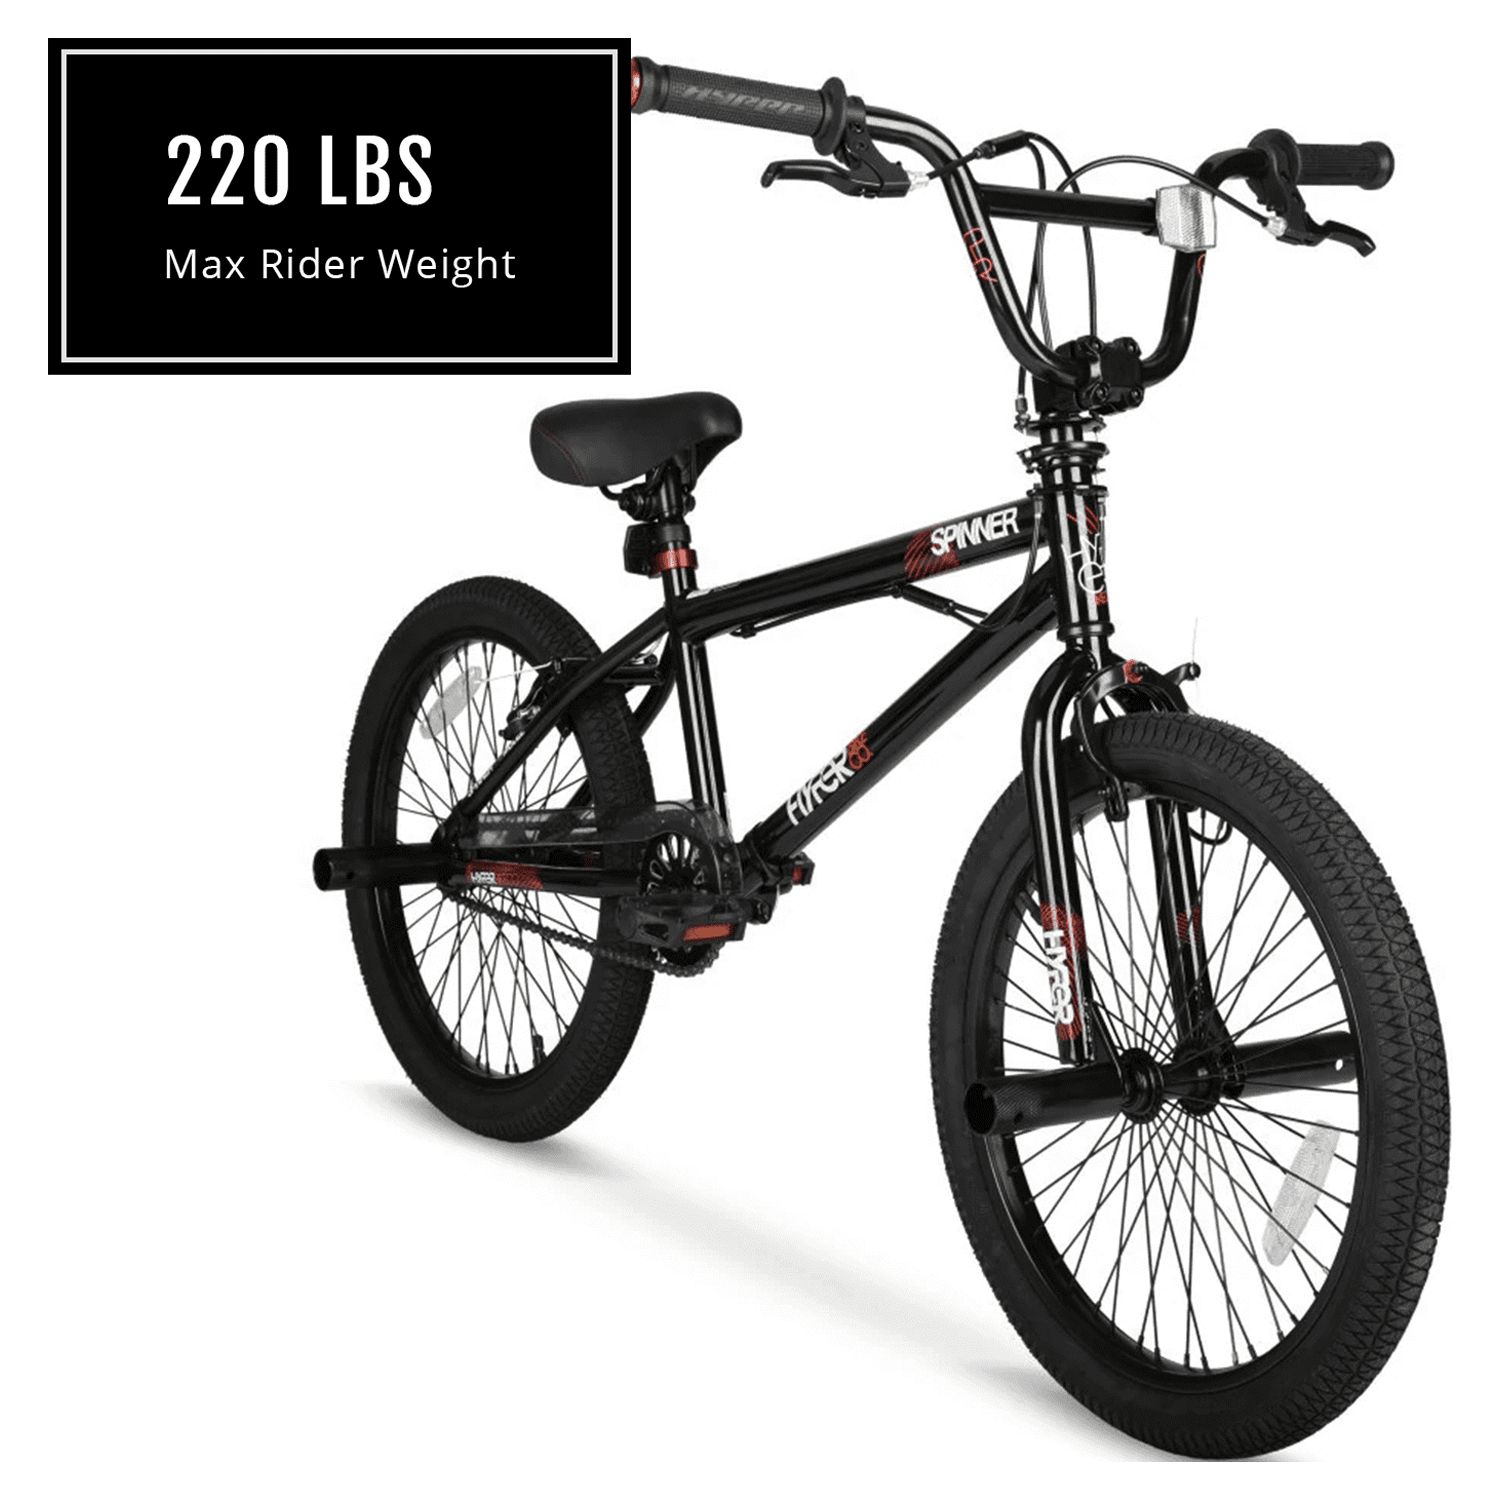 Hyper Bicycles 20" Boy's Spinner BMX Bike for Kids, Black, Recommended Ages Group 8 to 13 Years Old - image 3 of 12